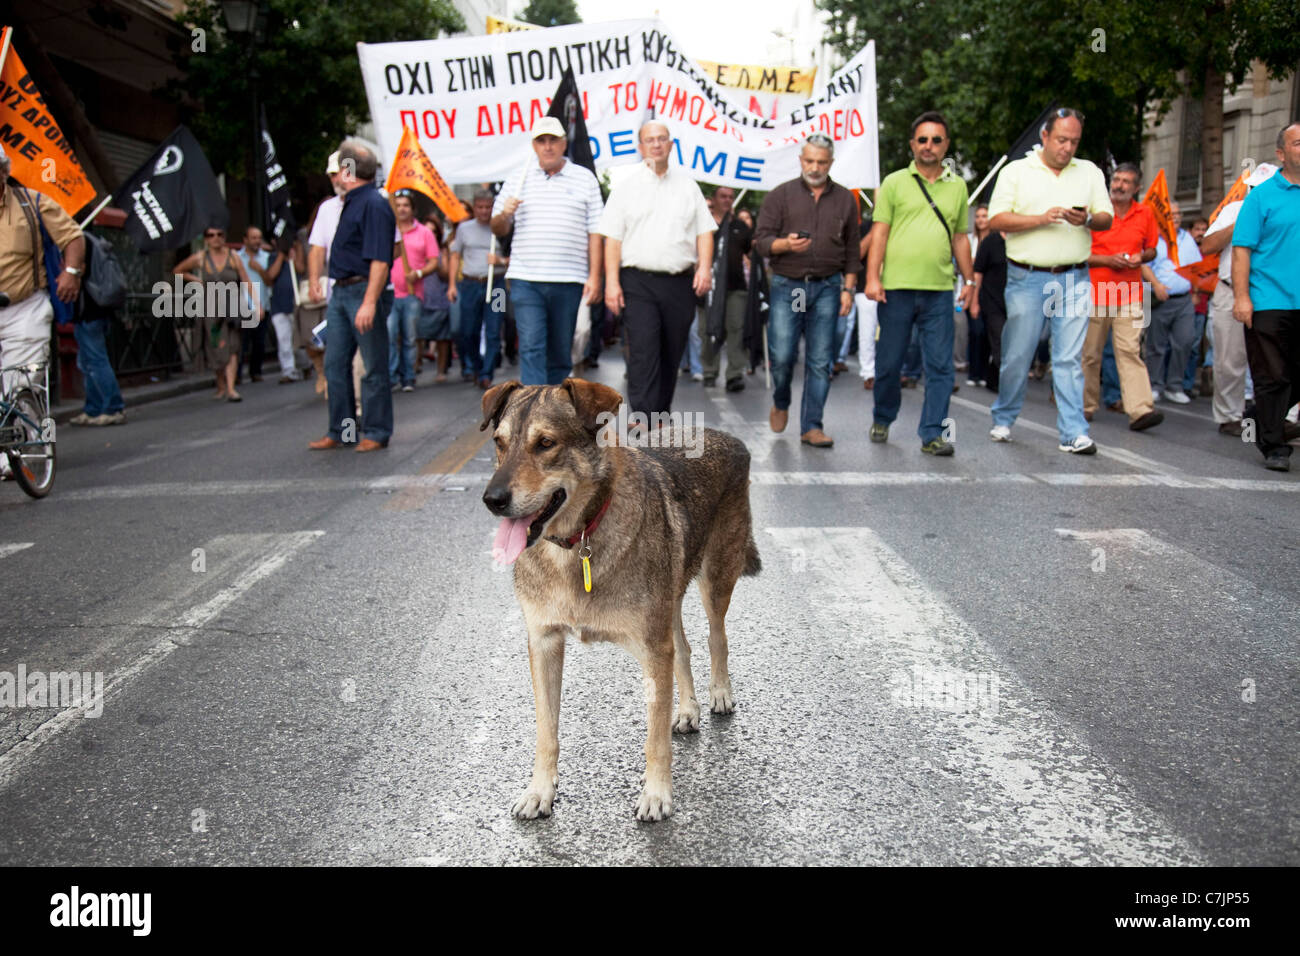 Demo god at march in demonstration against austerity measures and planned education reforms in Athens, Greece. Stock Photo